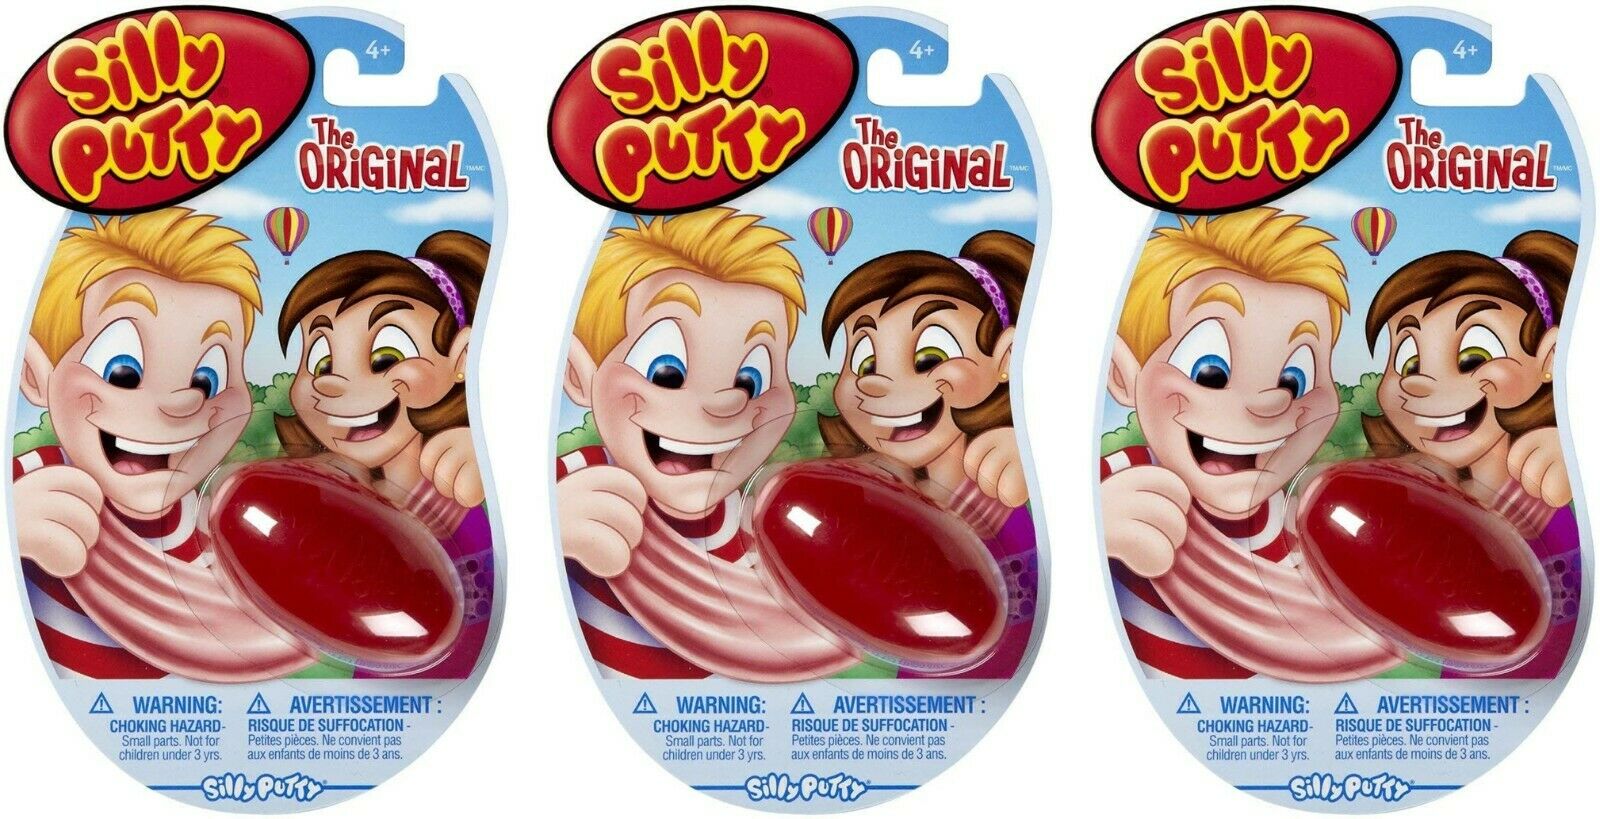 Silly Putty CRY08-0313 3-Pack-Crayola Original, 3 Pack